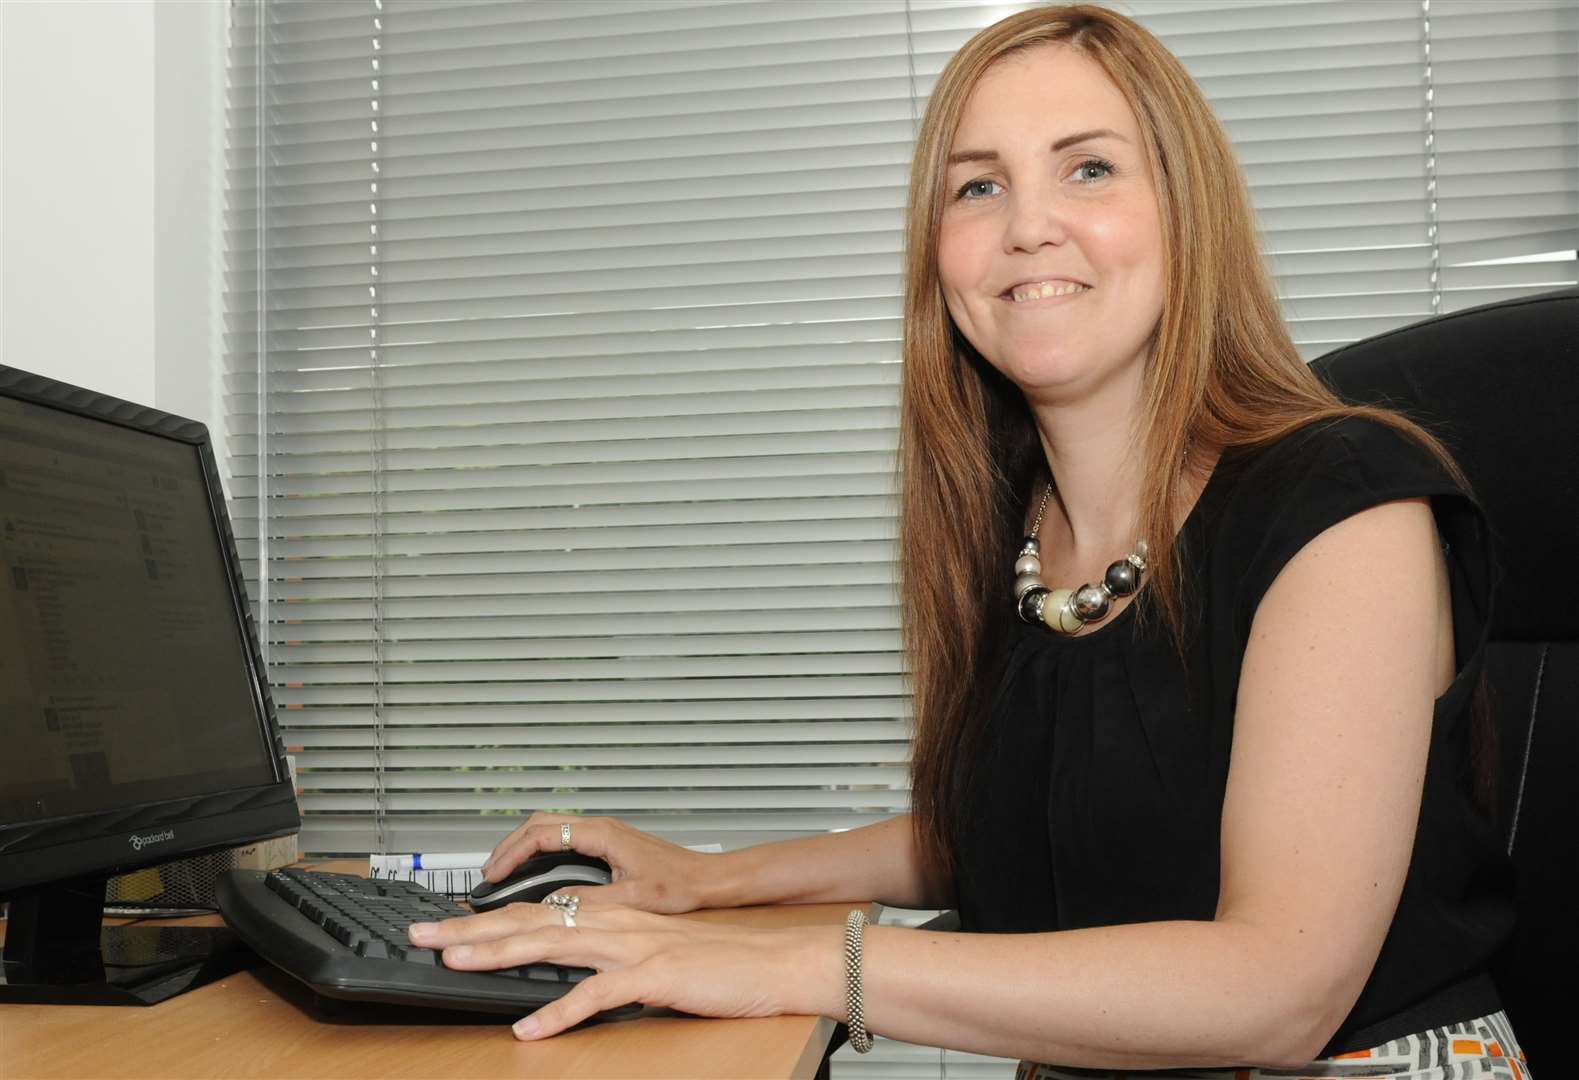 Zoe Cairns has become a specialist in social media